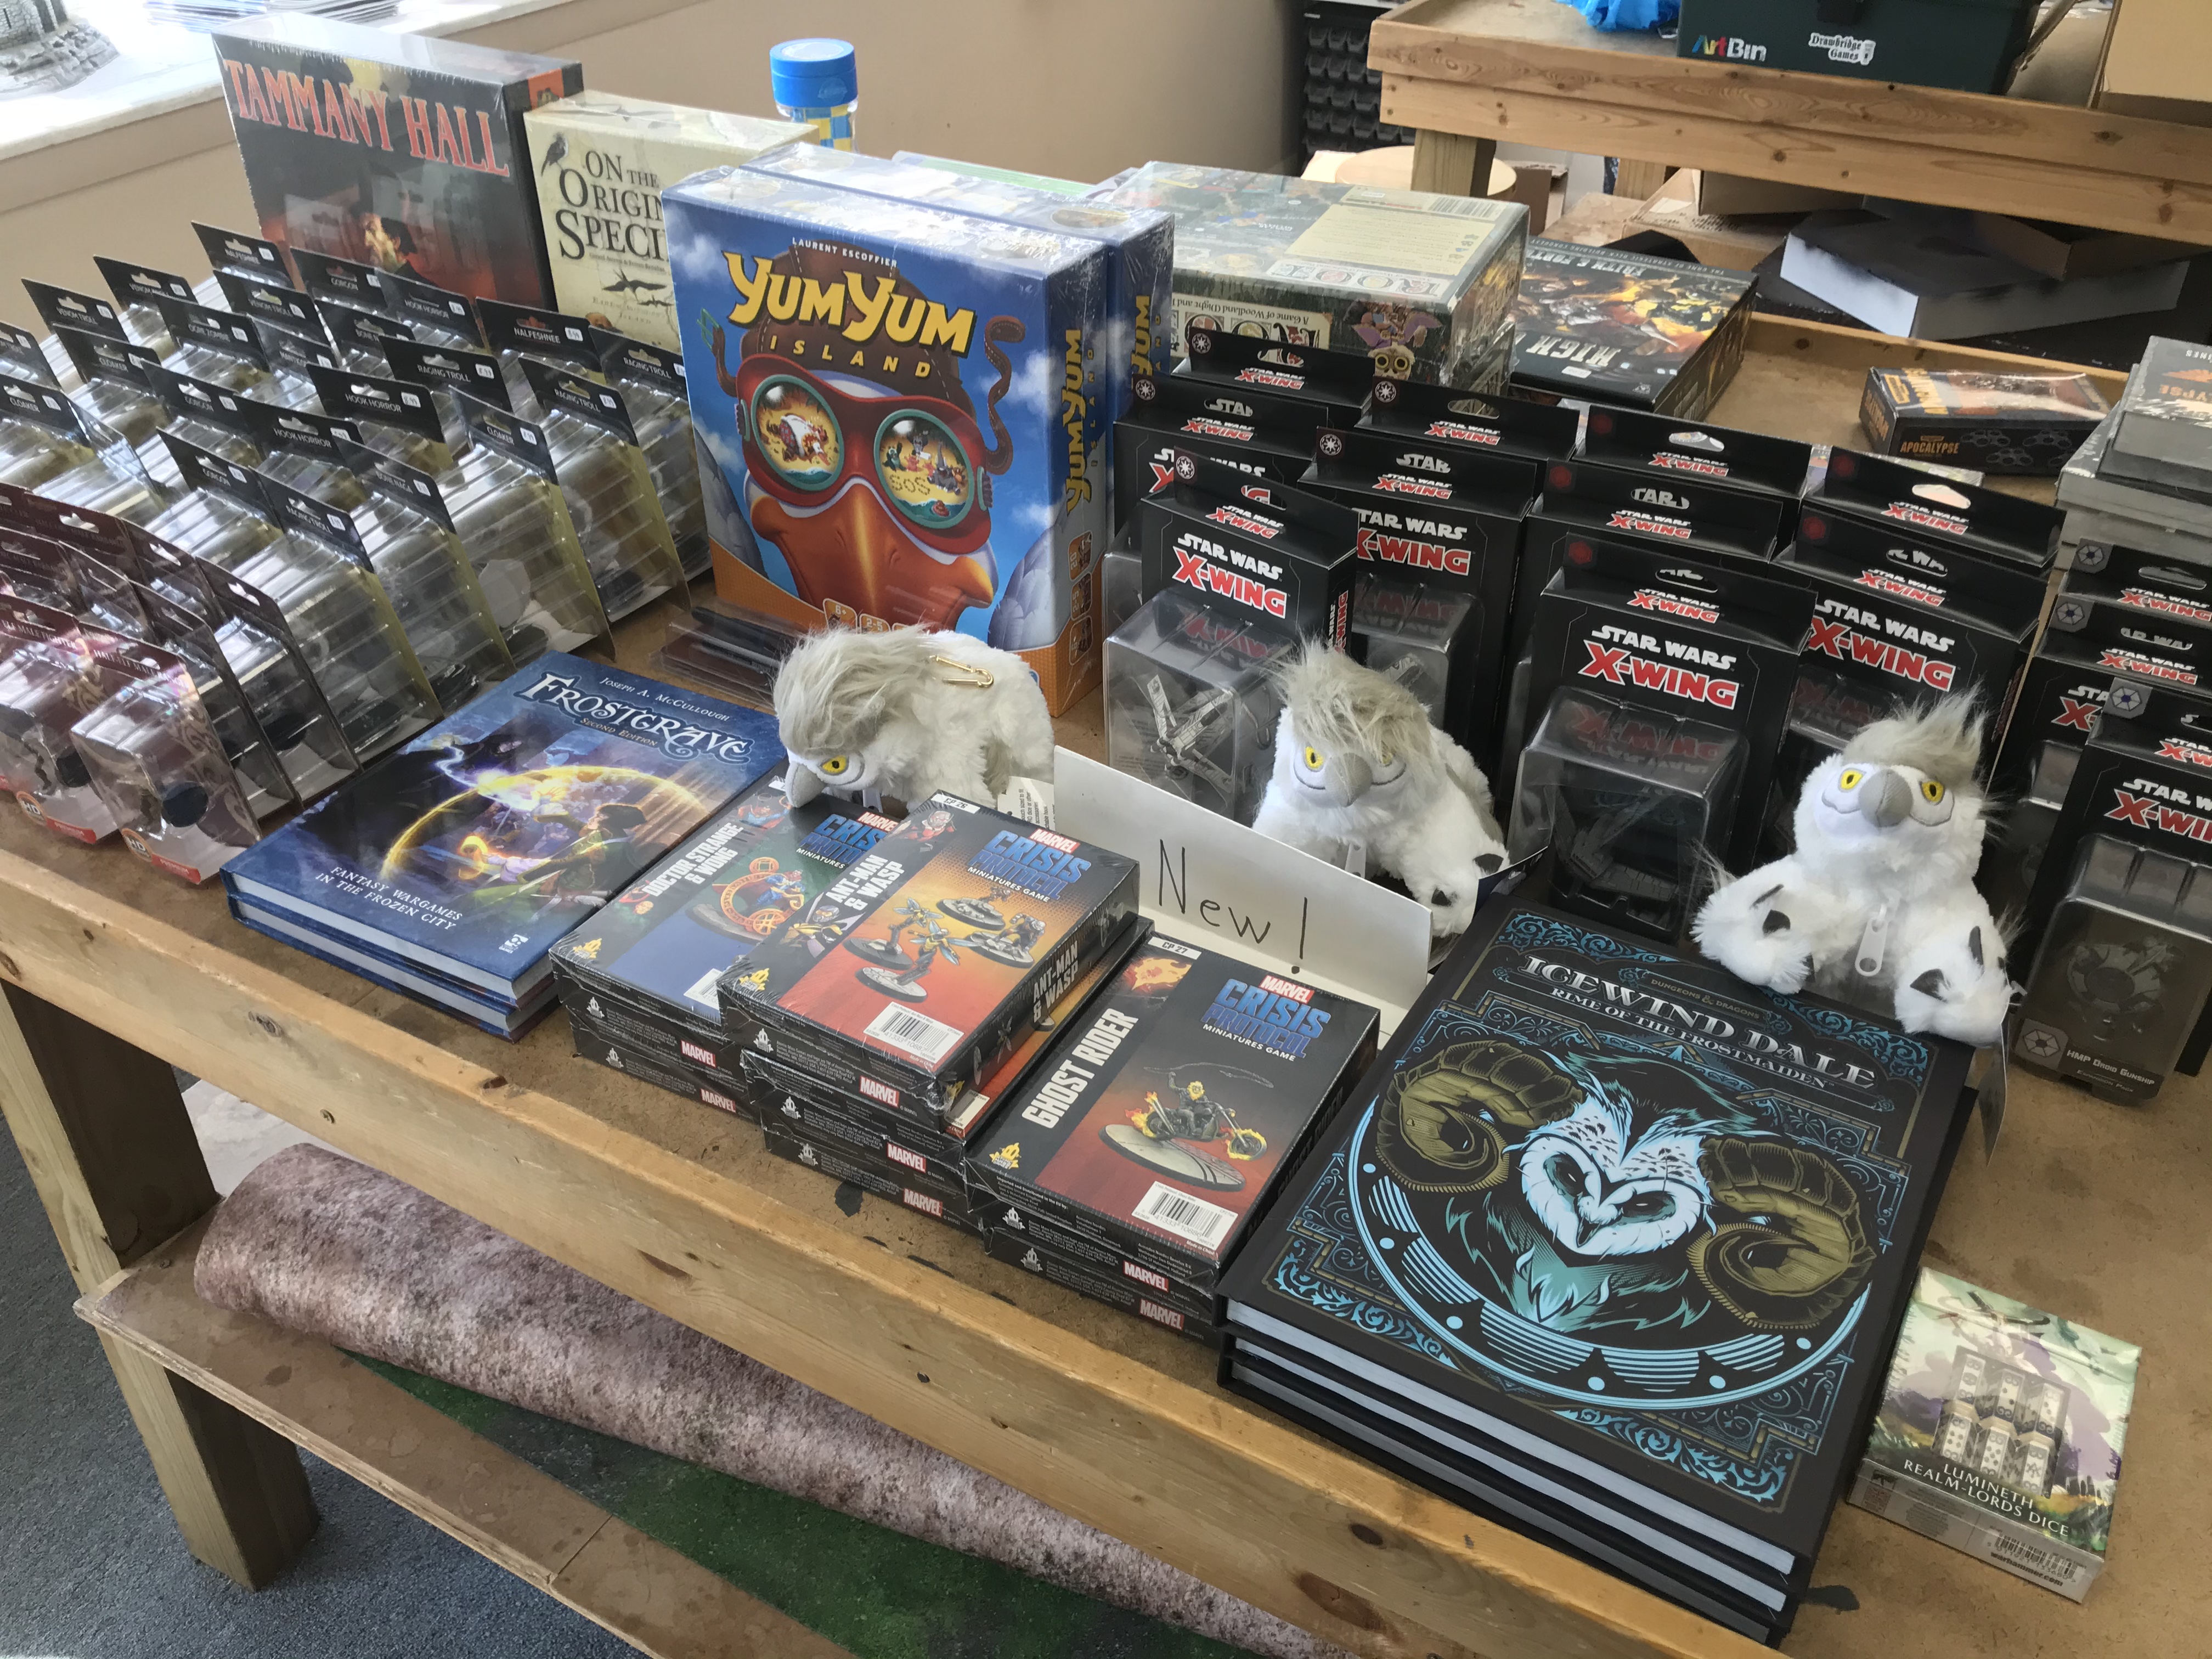 New Board Games, Miniatures, X-Wing Ships, and Owl Bears!